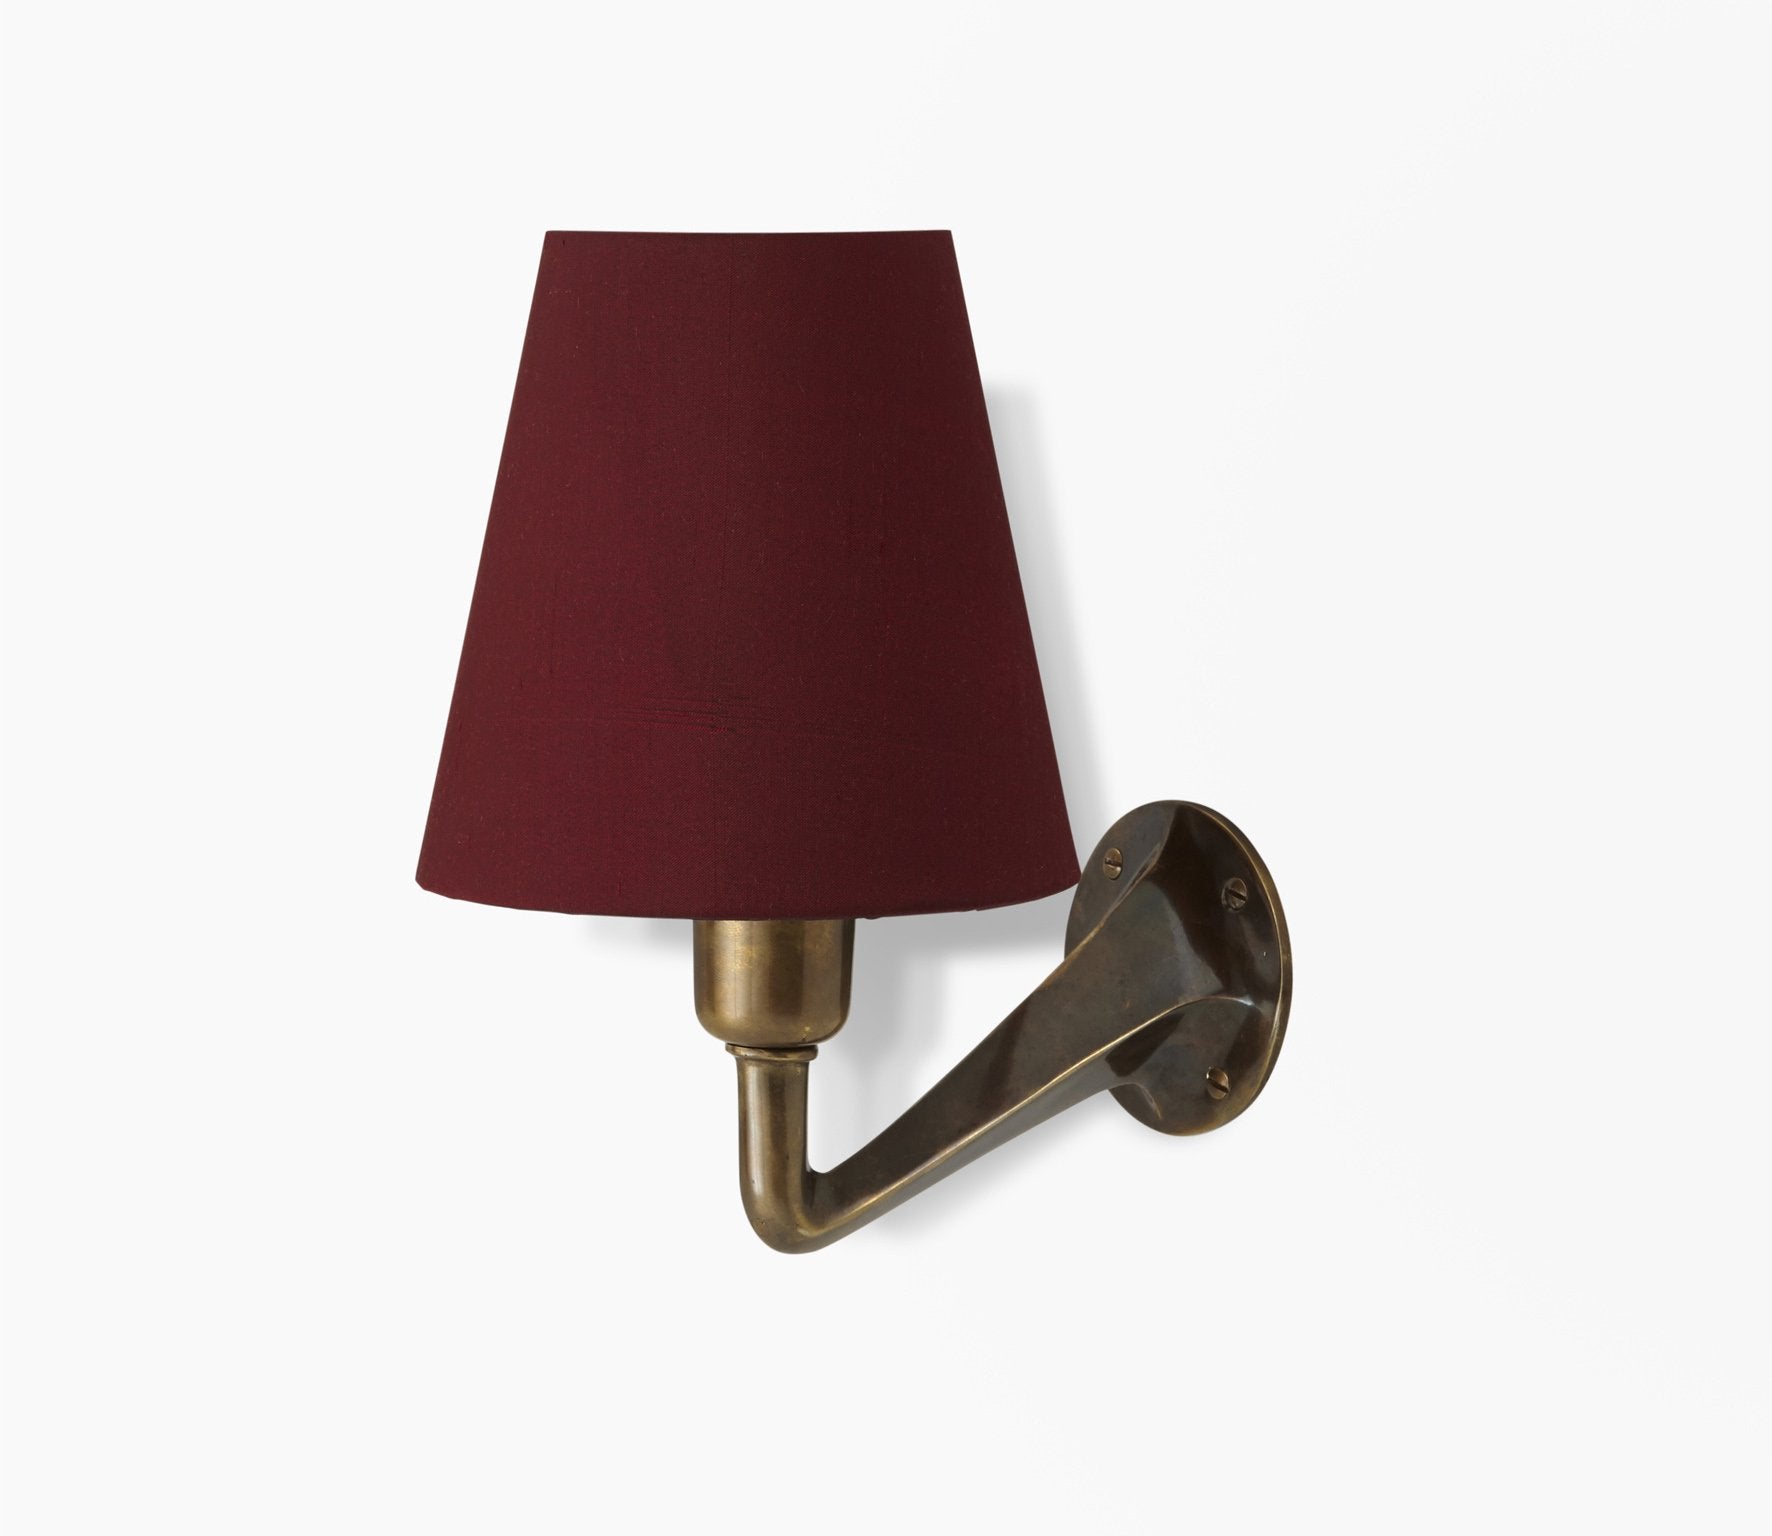 Leila Wall Light with Plain Empire Shade Product Image 3